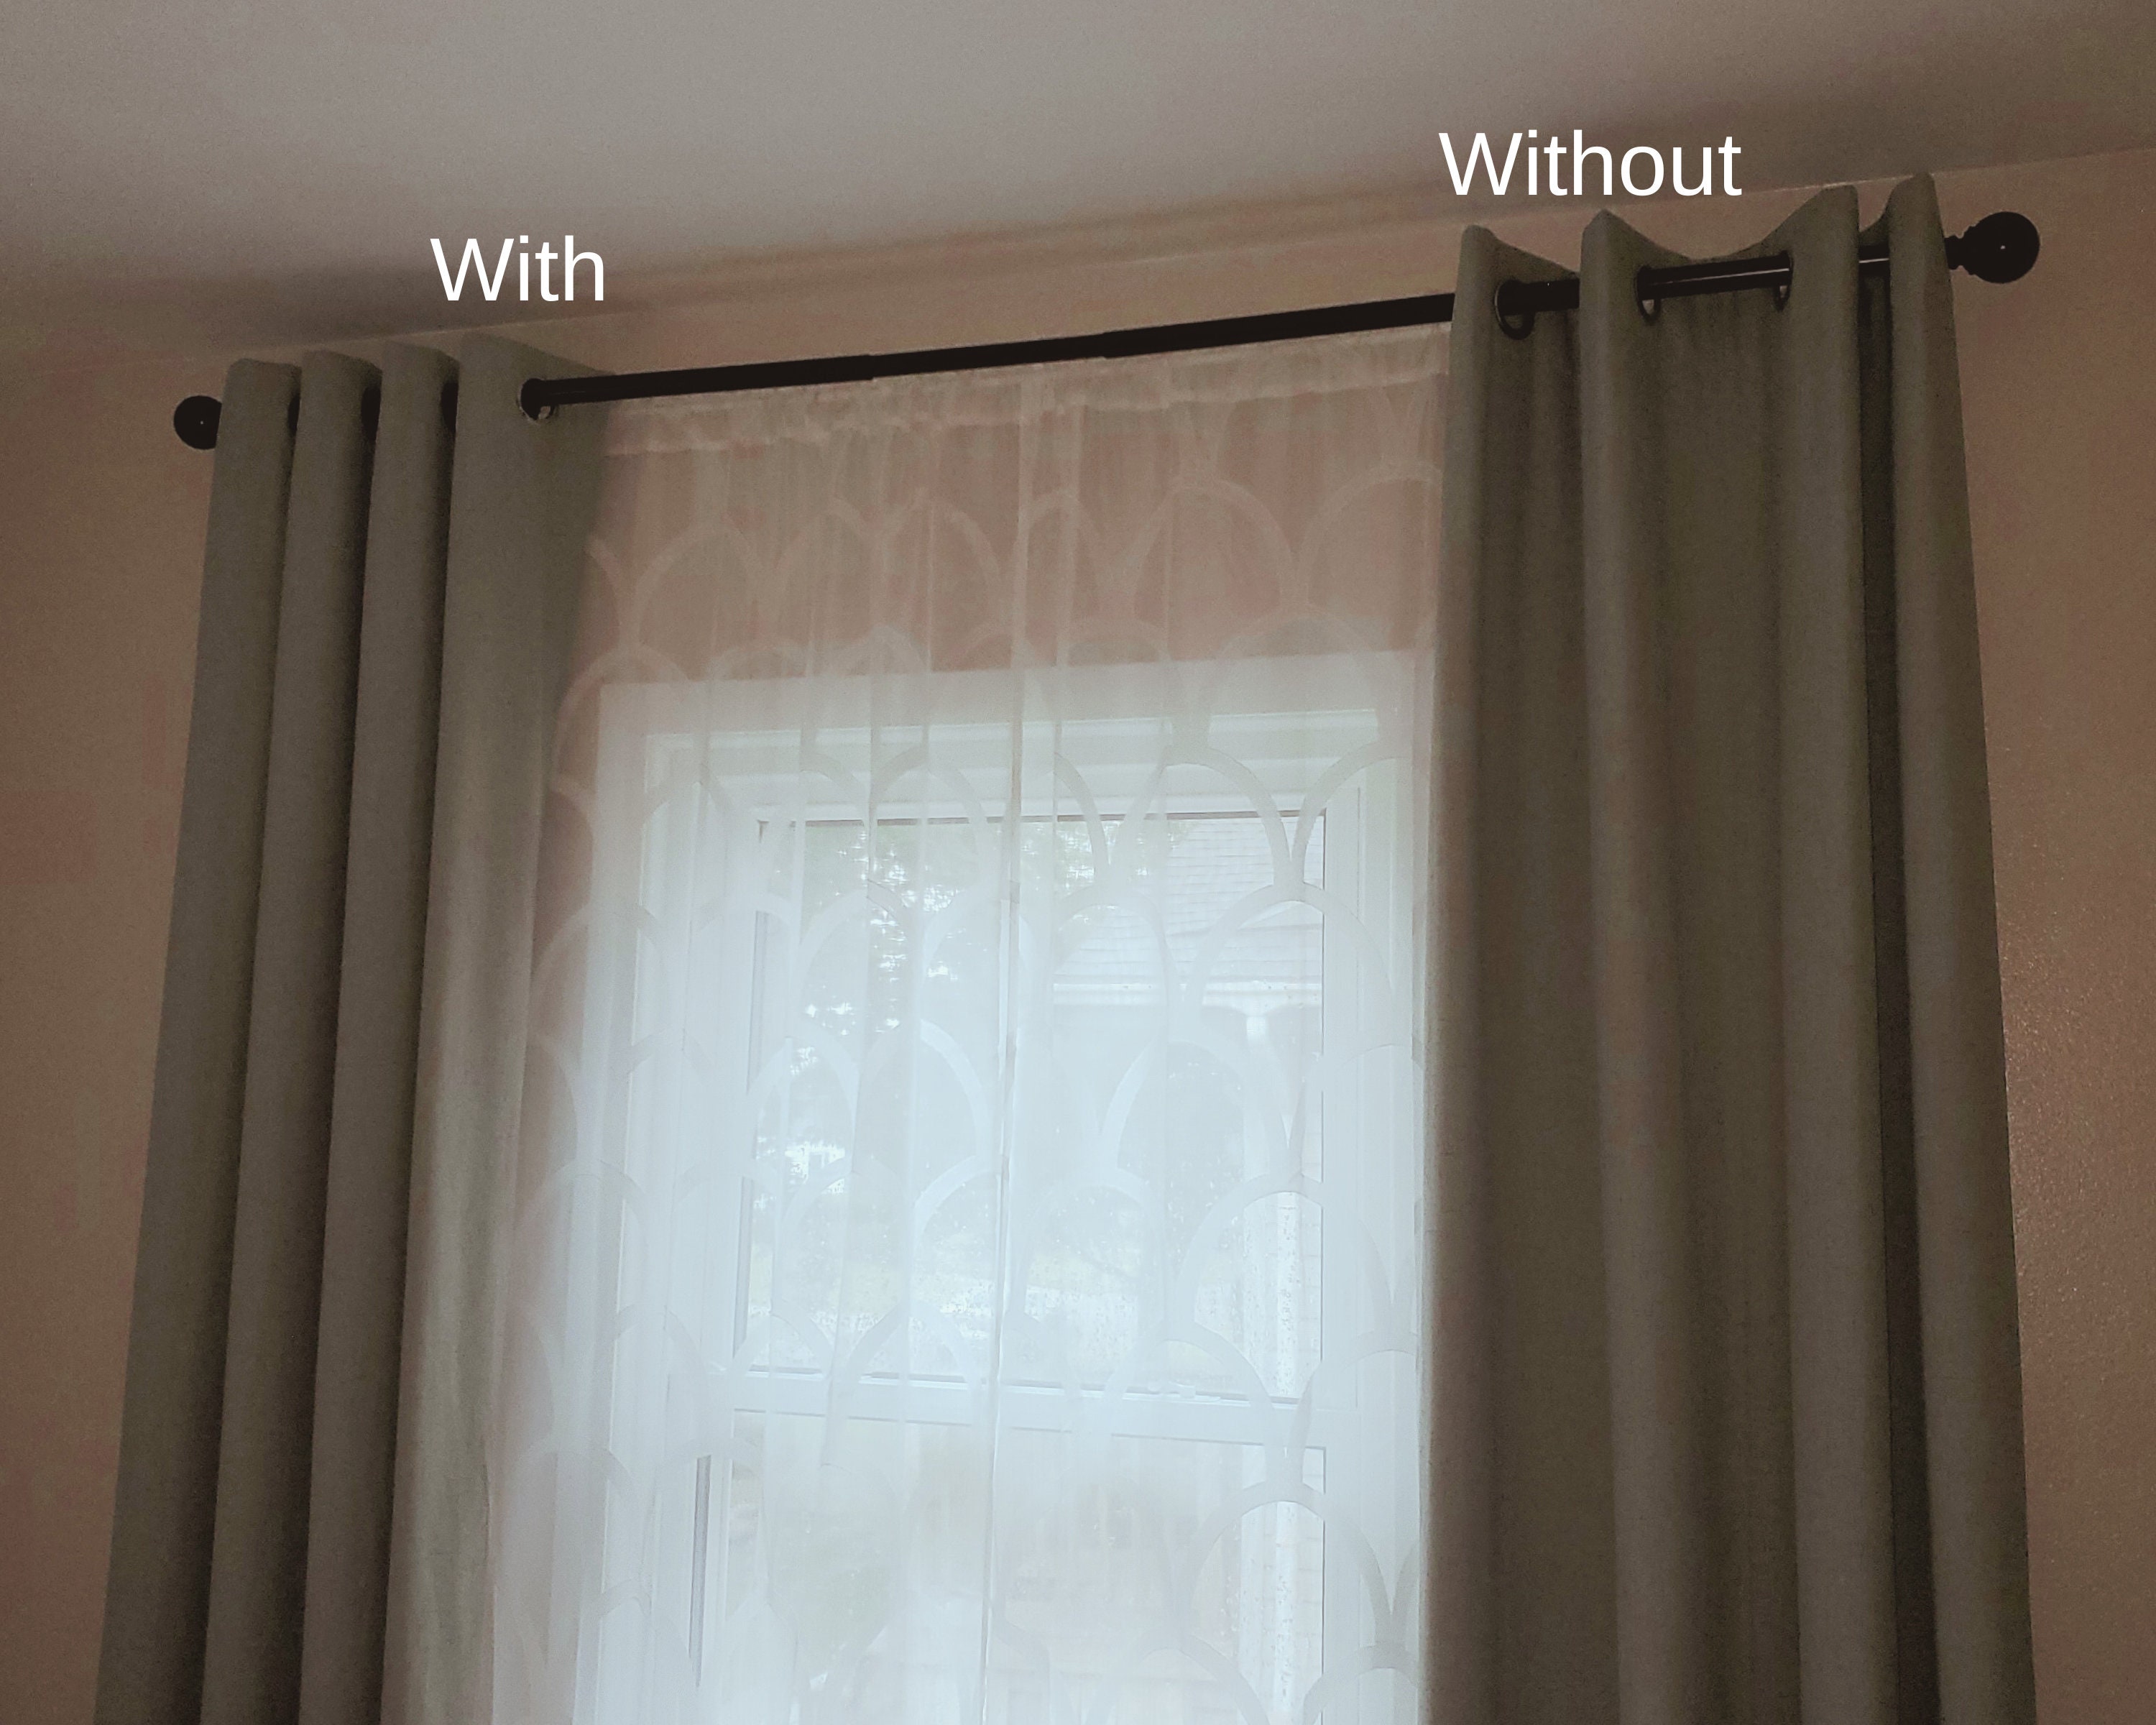  Curtain Spacers (Large) - Curtain Shapers - Drapery Spacers -  Curtains - Curtain Accessories - Pleats : Home & Kitchen